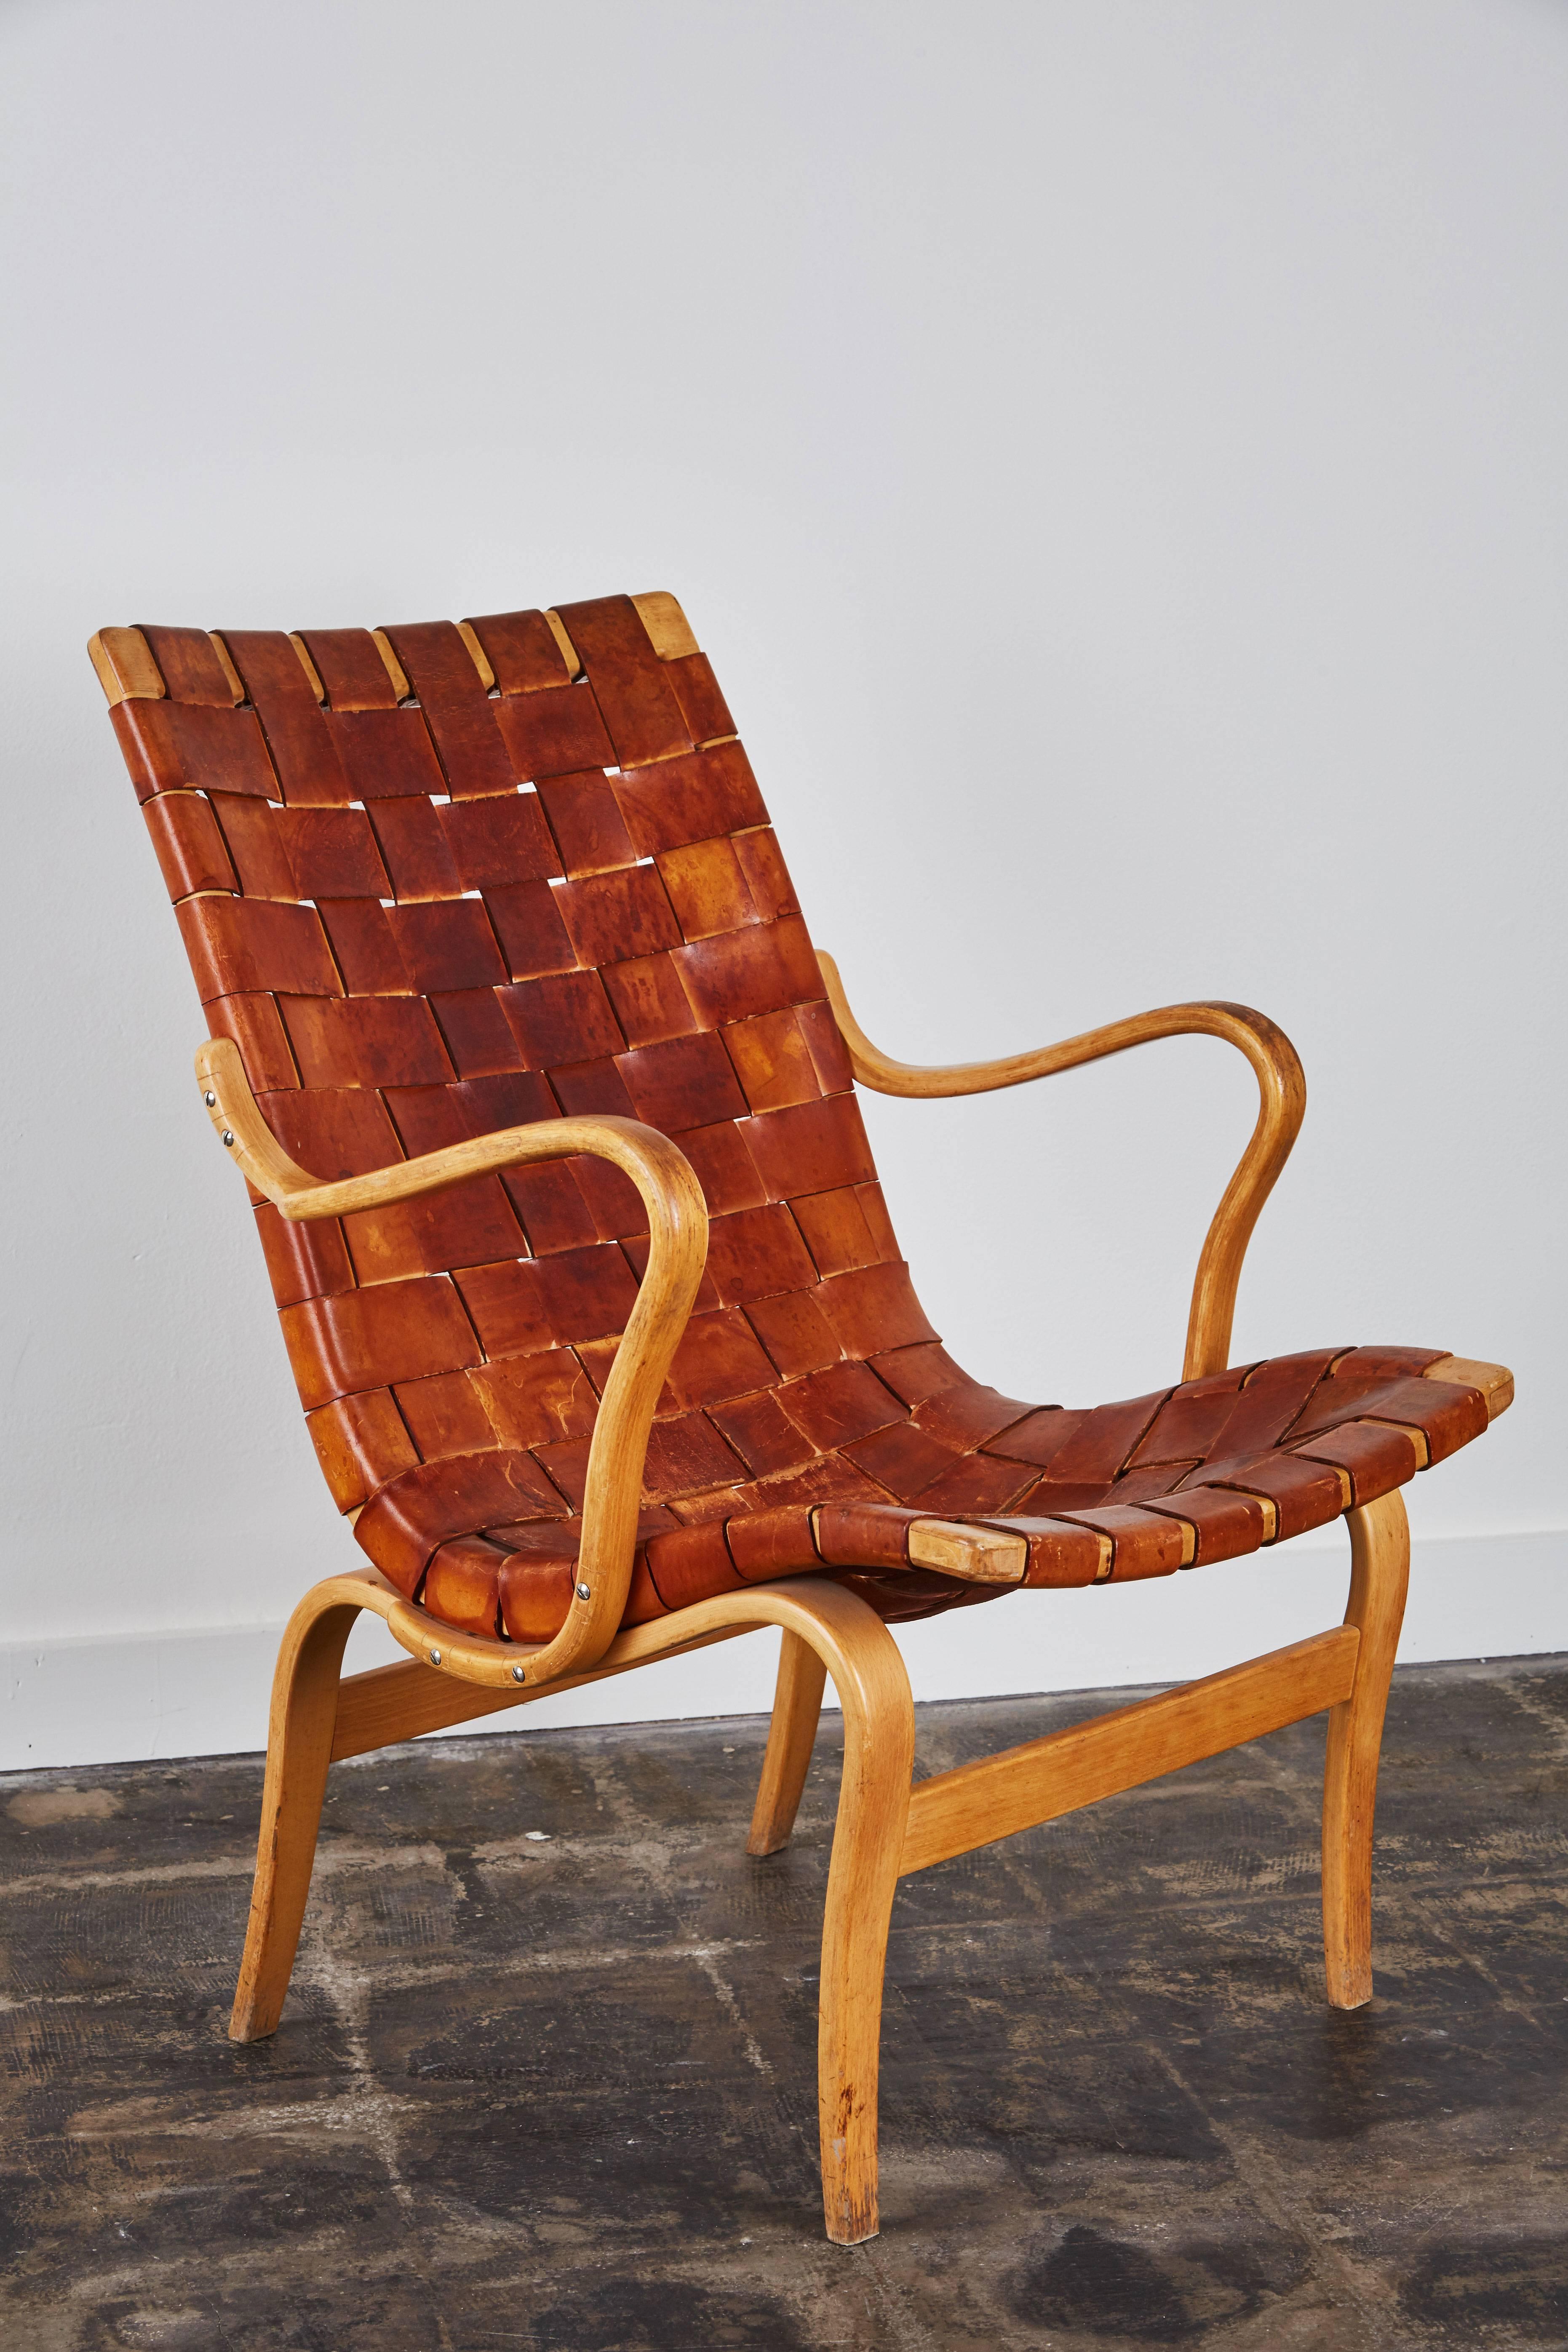 Pair of patinated leather armchairs by Bruno Mathsson for Karl Mathsson. Made in Sweden, circa 1960s.

Signed with branded manufacturer's marks to stretcher.